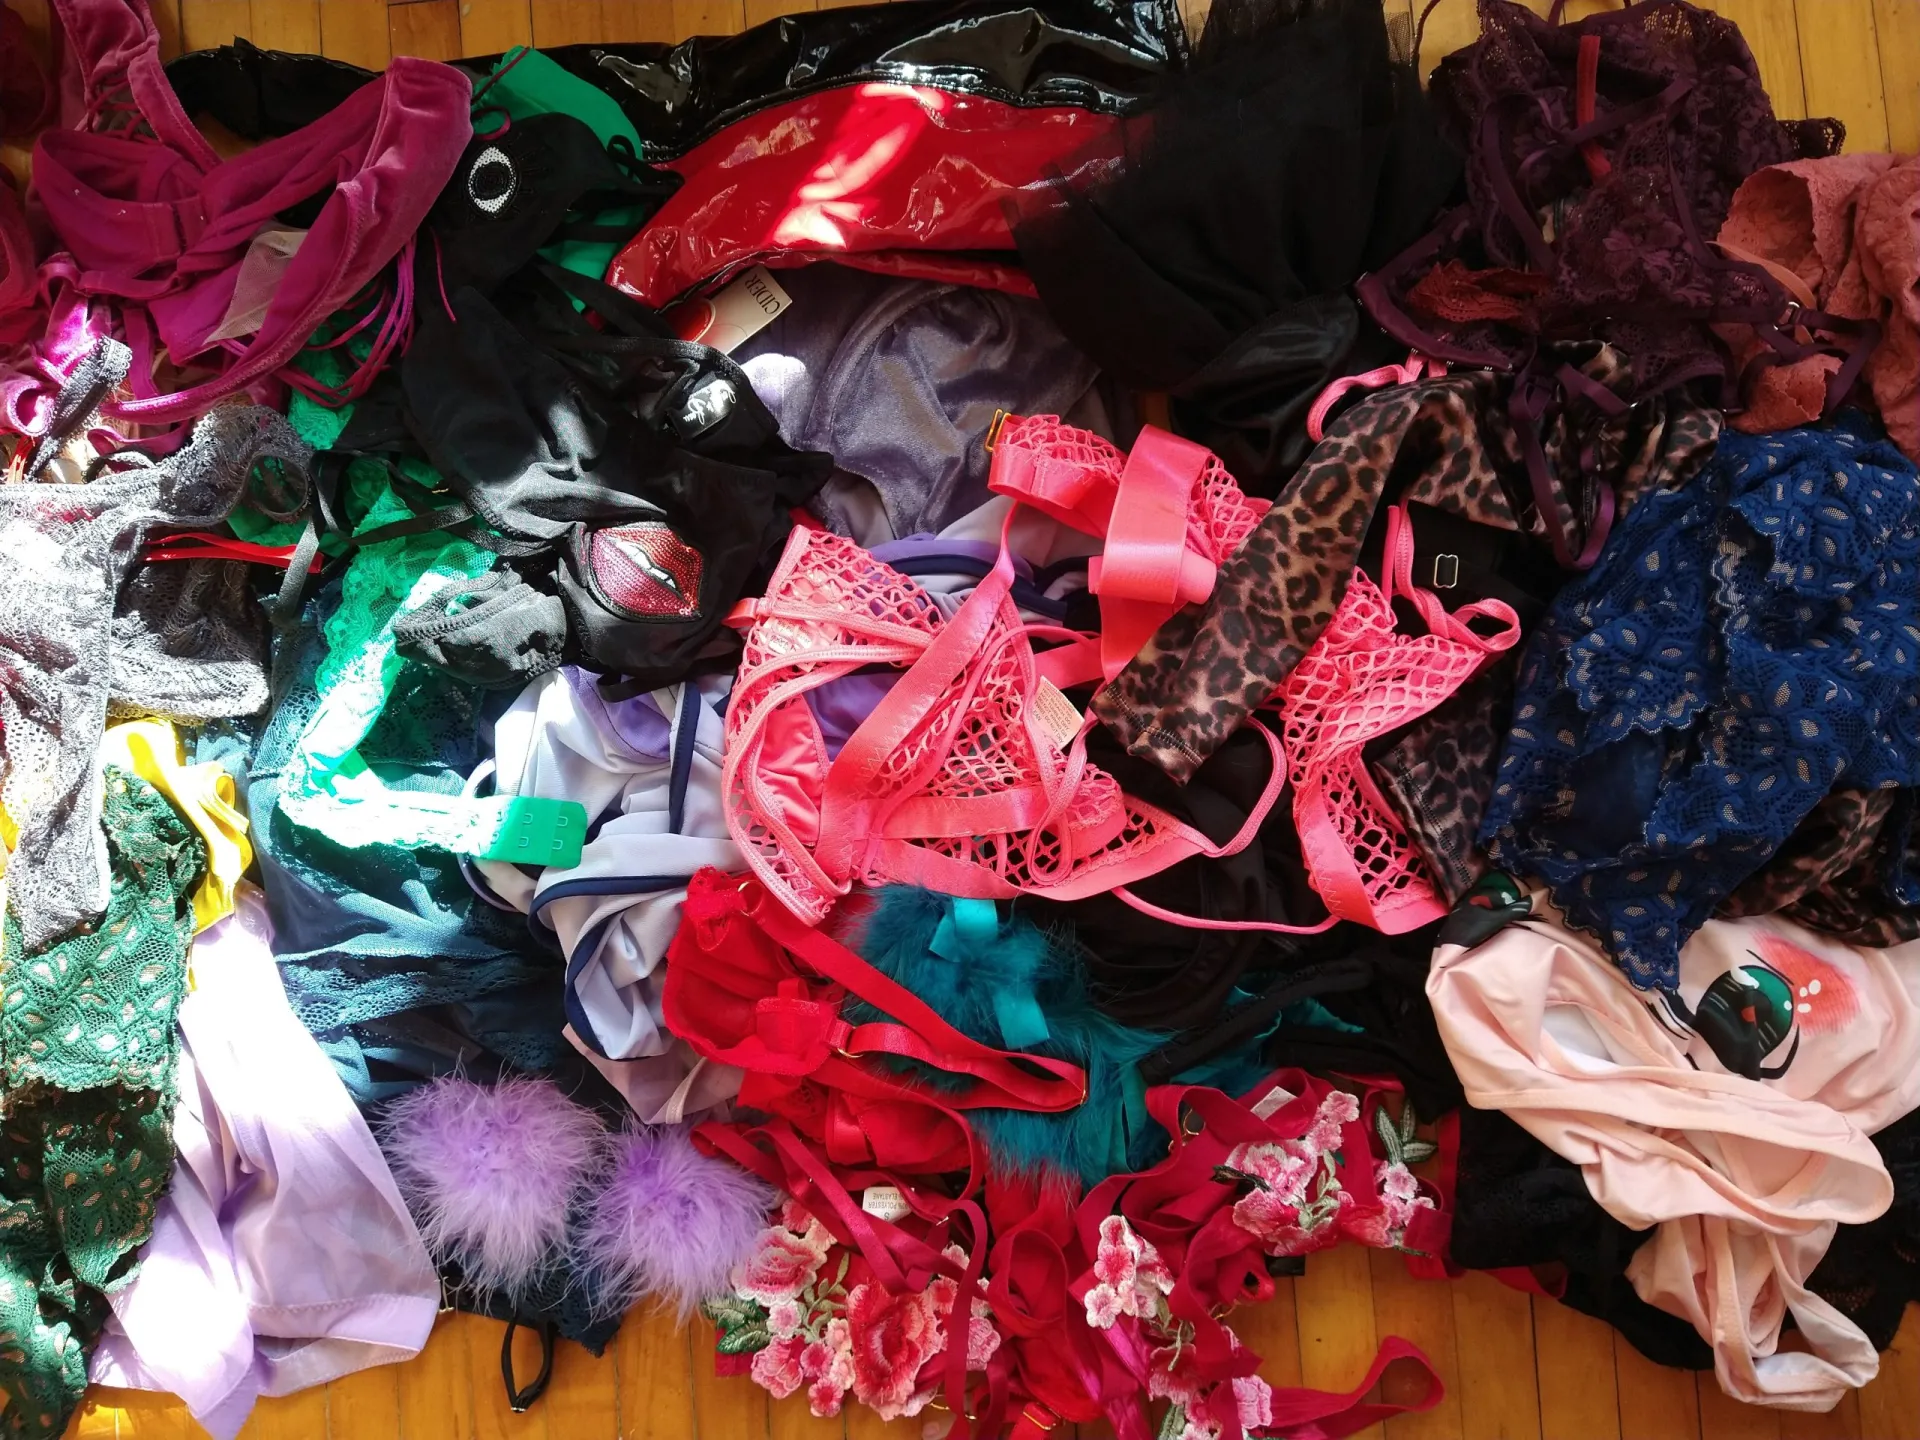 Pile of lacy and patterned lingerie on a wooden floor.  